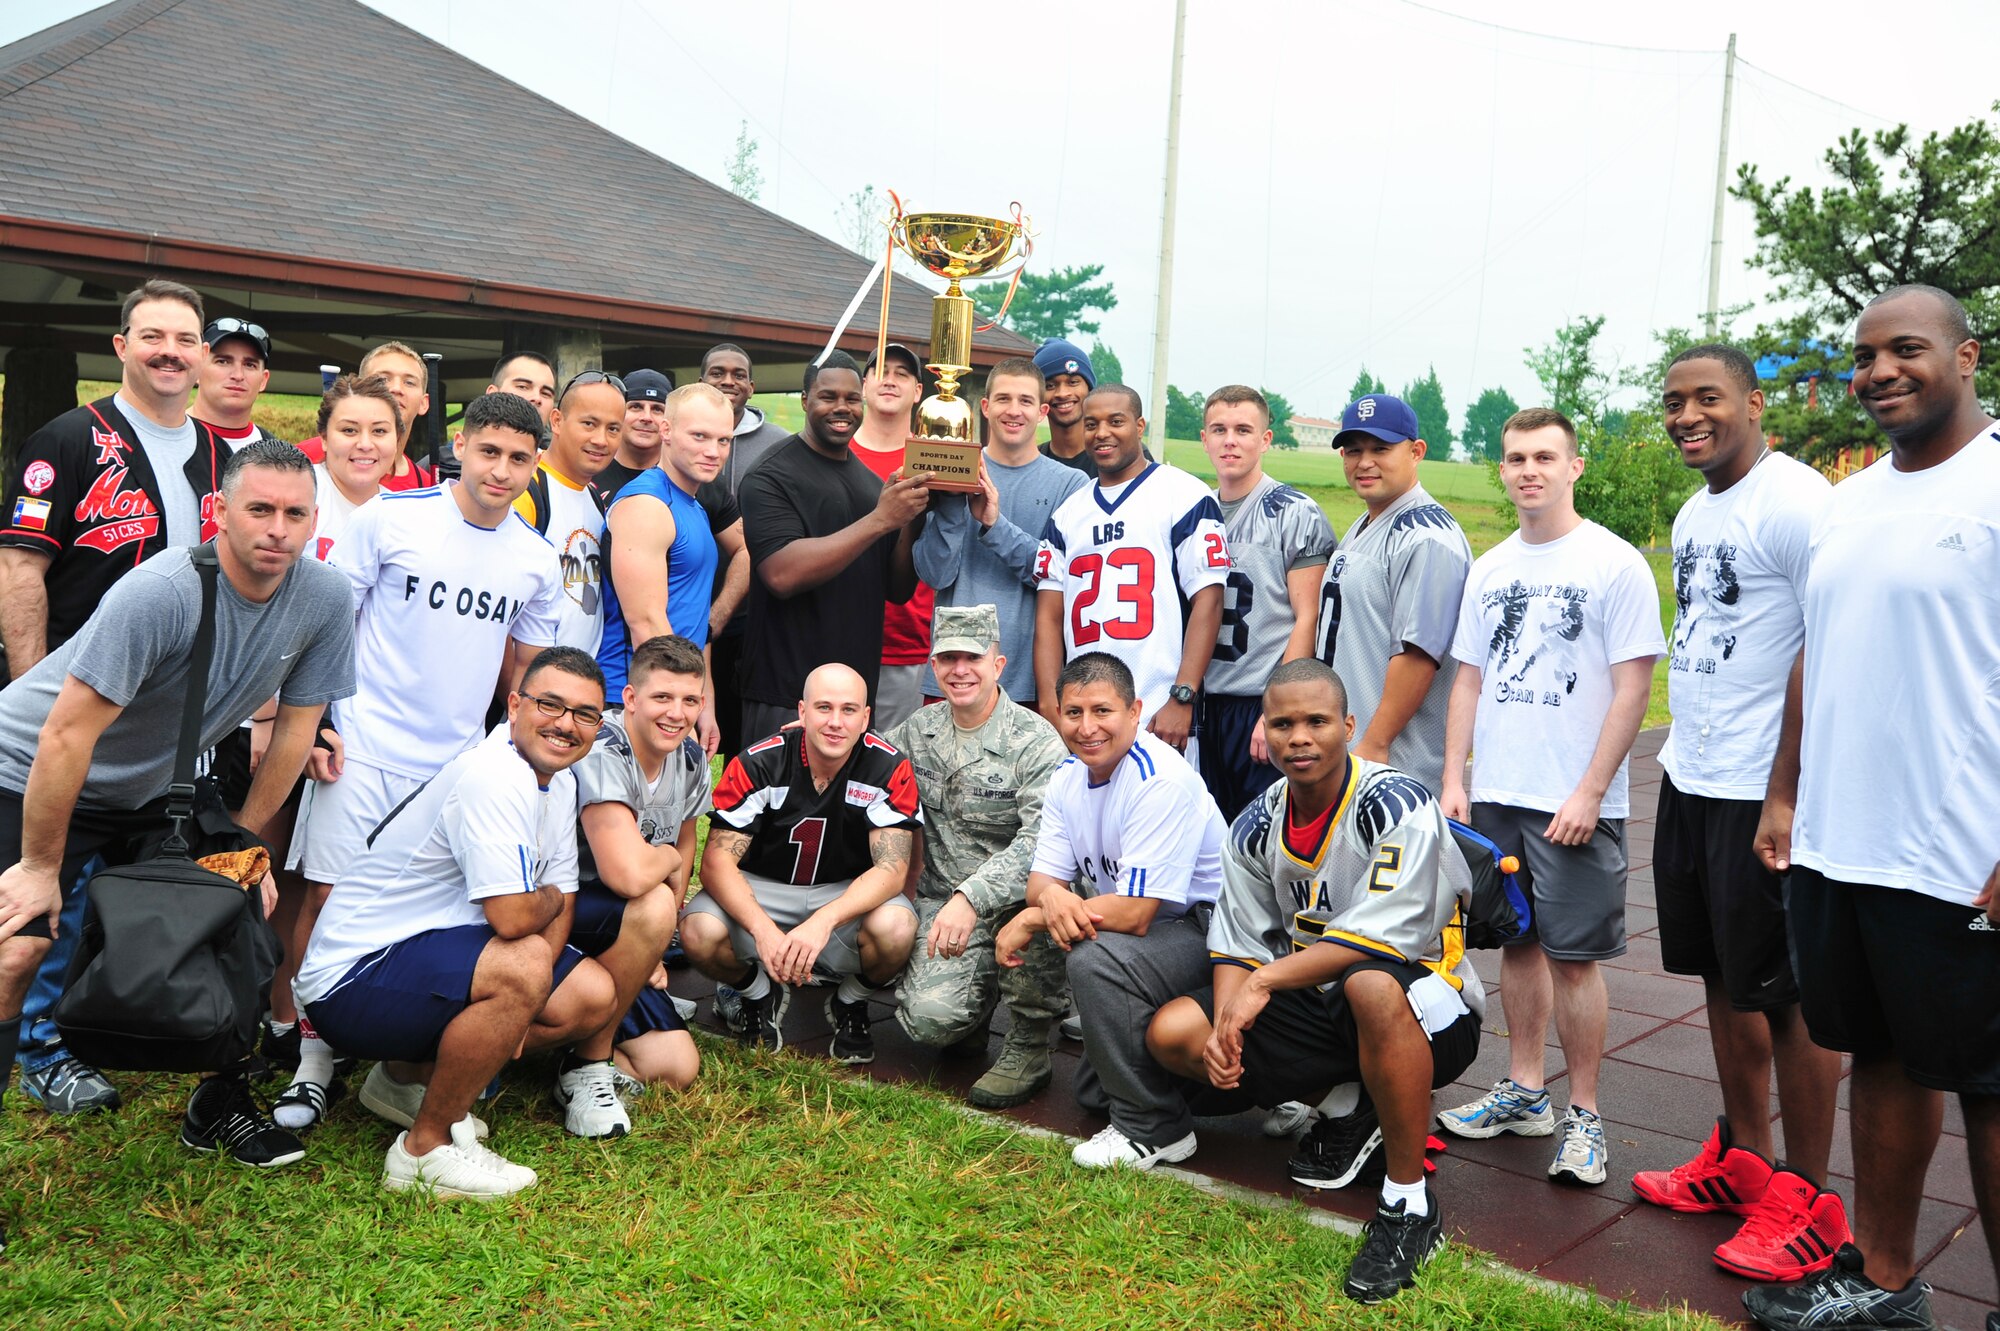 Team Osan members gather around their first place trophy following the 2012 Sports Day competition at Osan Air Base, Republic of Korea, Sept. 28, 2012. Participants from across the peninsula traveled from Kunsan and Daegu air bases to compete in a day full of sporting events at Osan to include football, softball, dodge ball, volleyball and bowling. (U.S. Air Force photo/Airman 1st Class Alexis Siekert)